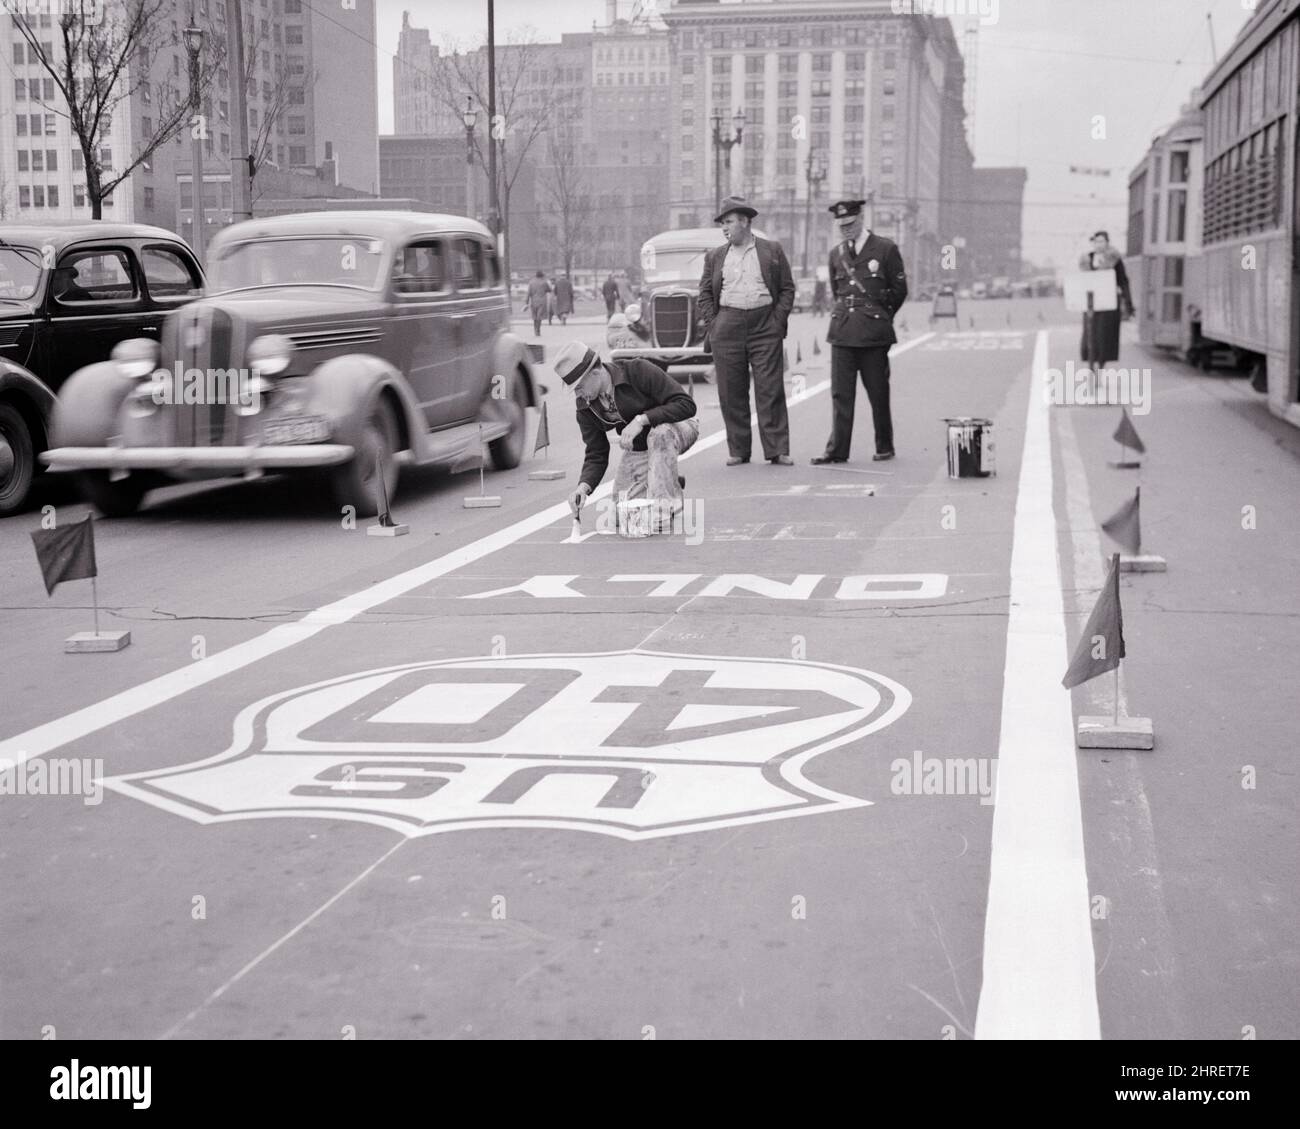 1930s WORKERS PAINTING ROUTE SIGN ON ROAD FOR TURN ONTO US ROUTE 40 A MAJOR TRANSCONTINENTAL ROUTE ST. LOUIS MISSOURI USA - q44629 CPC001 HARS VEHICLE TEAMWORK TURN HISTORY FEMALES UNITED STATES COPY SPACE HIGHWAY LADIES PERSONS UNITED STATES OF AMERICA AUTOMOBILE MALES ORDER OFFICER PAINTER TRANSPORTATION B&W NORTH AMERICA COP DIRECTIONS NORTH AMERICAN PROTECT LOUIS AND AUTOS MISSOURI DIRECTION LABOR EMPLOYMENT OCCUPATIONS ONTO UNIFORMS FREEWAY AUTOMOBILES CITIES ROUTE ST. VEHICLES EMPLOYEE OFFICERS POLICEMEN COOPERATION COPS MAJOR ROADS SOLUTIONS BADGE BADGES BLACK AND WHITE Stock Photo